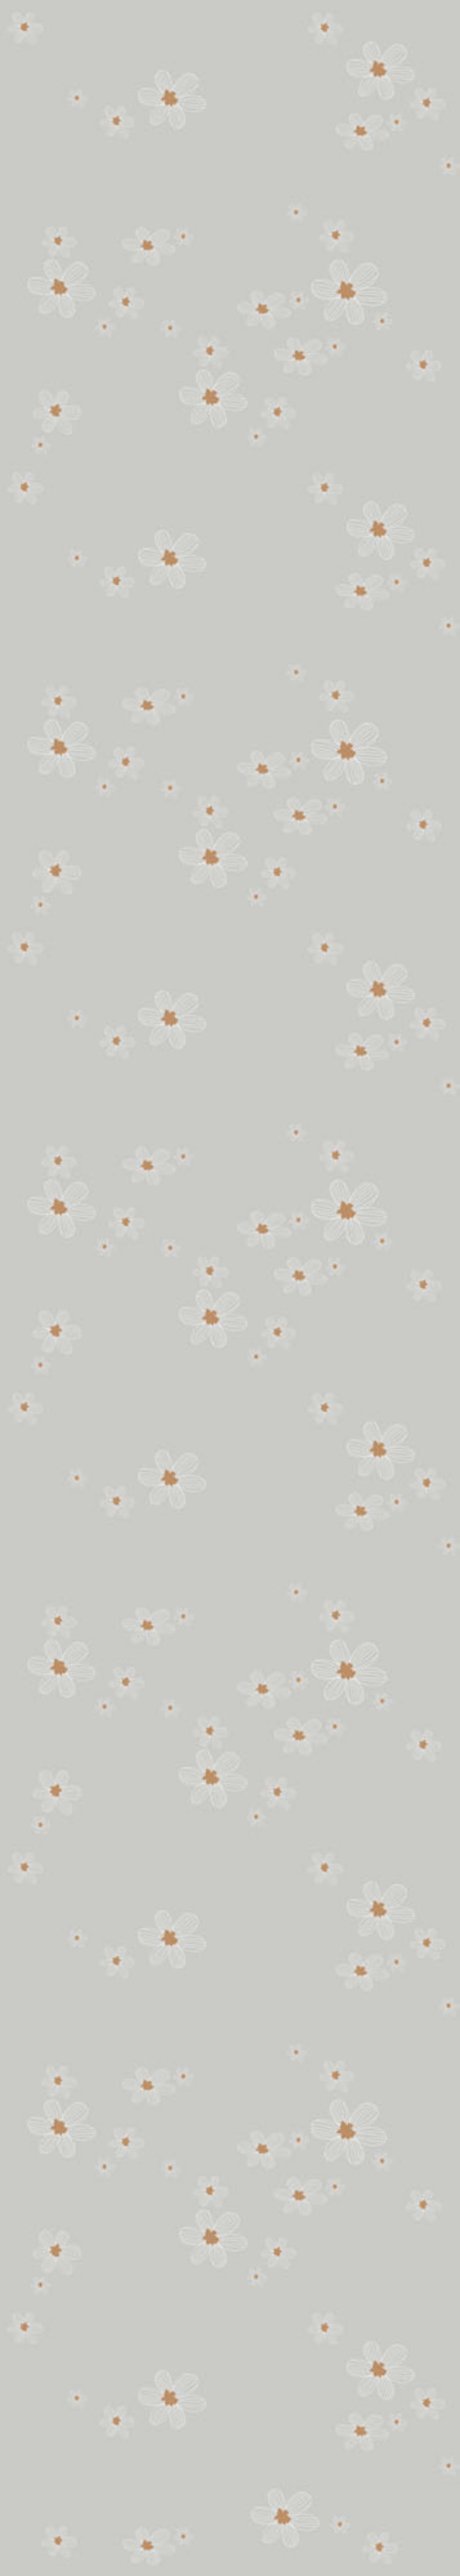 Graphic Flowers On Grey Background Wallpaper 50x280CM